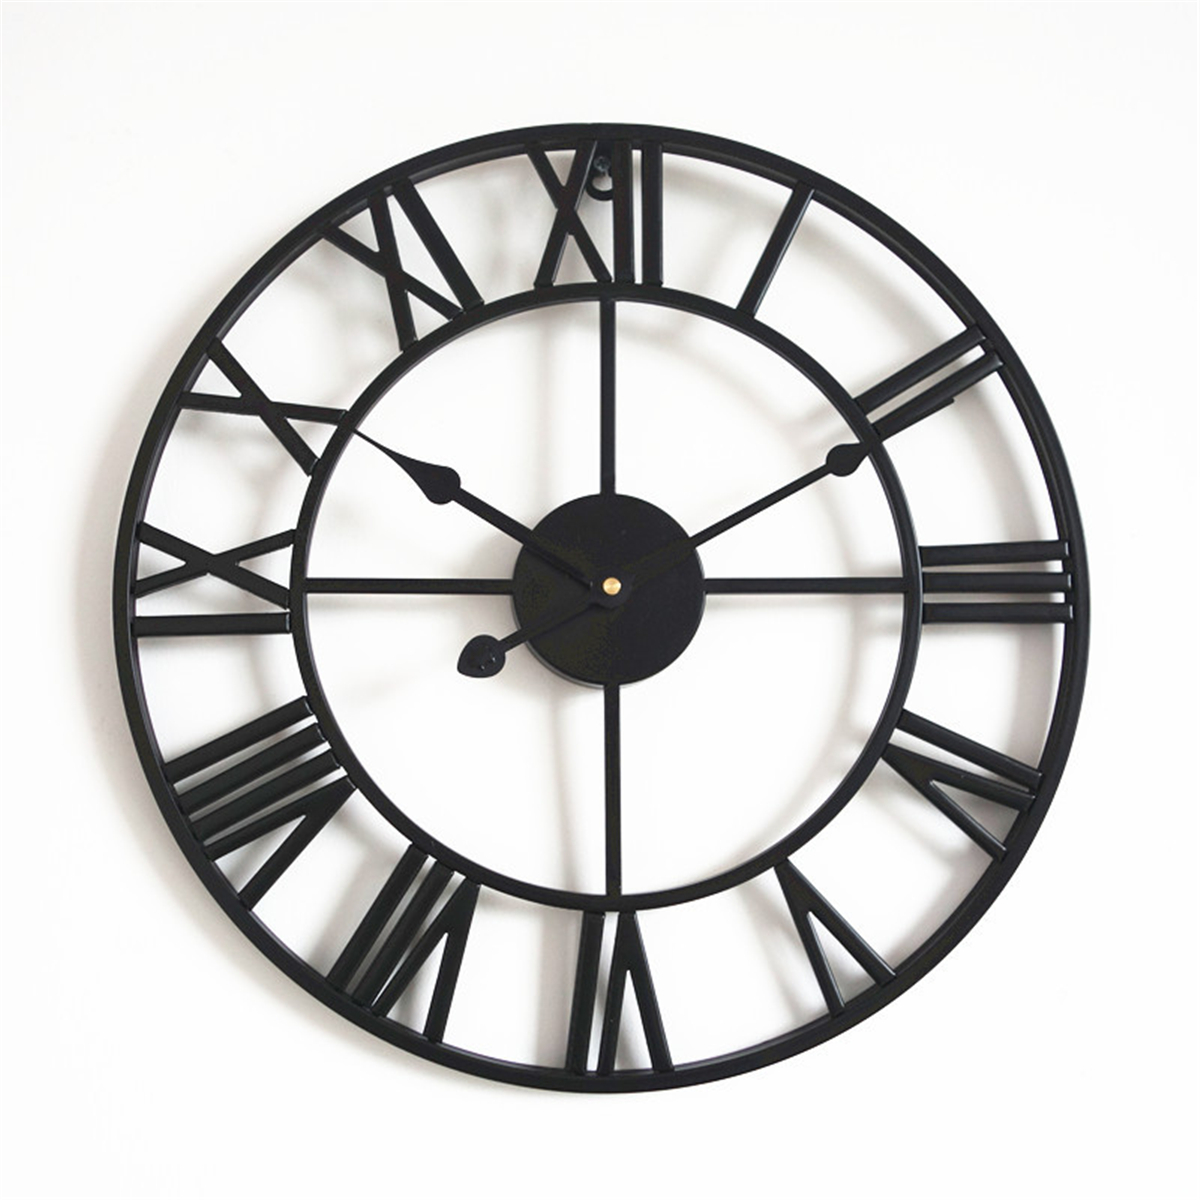 Find Extra Large Wall Clock 18 Inch Vintage Rustic Oversized Metal Wall Clocks for Sale on Gipsybee.com with cryptocurrencies